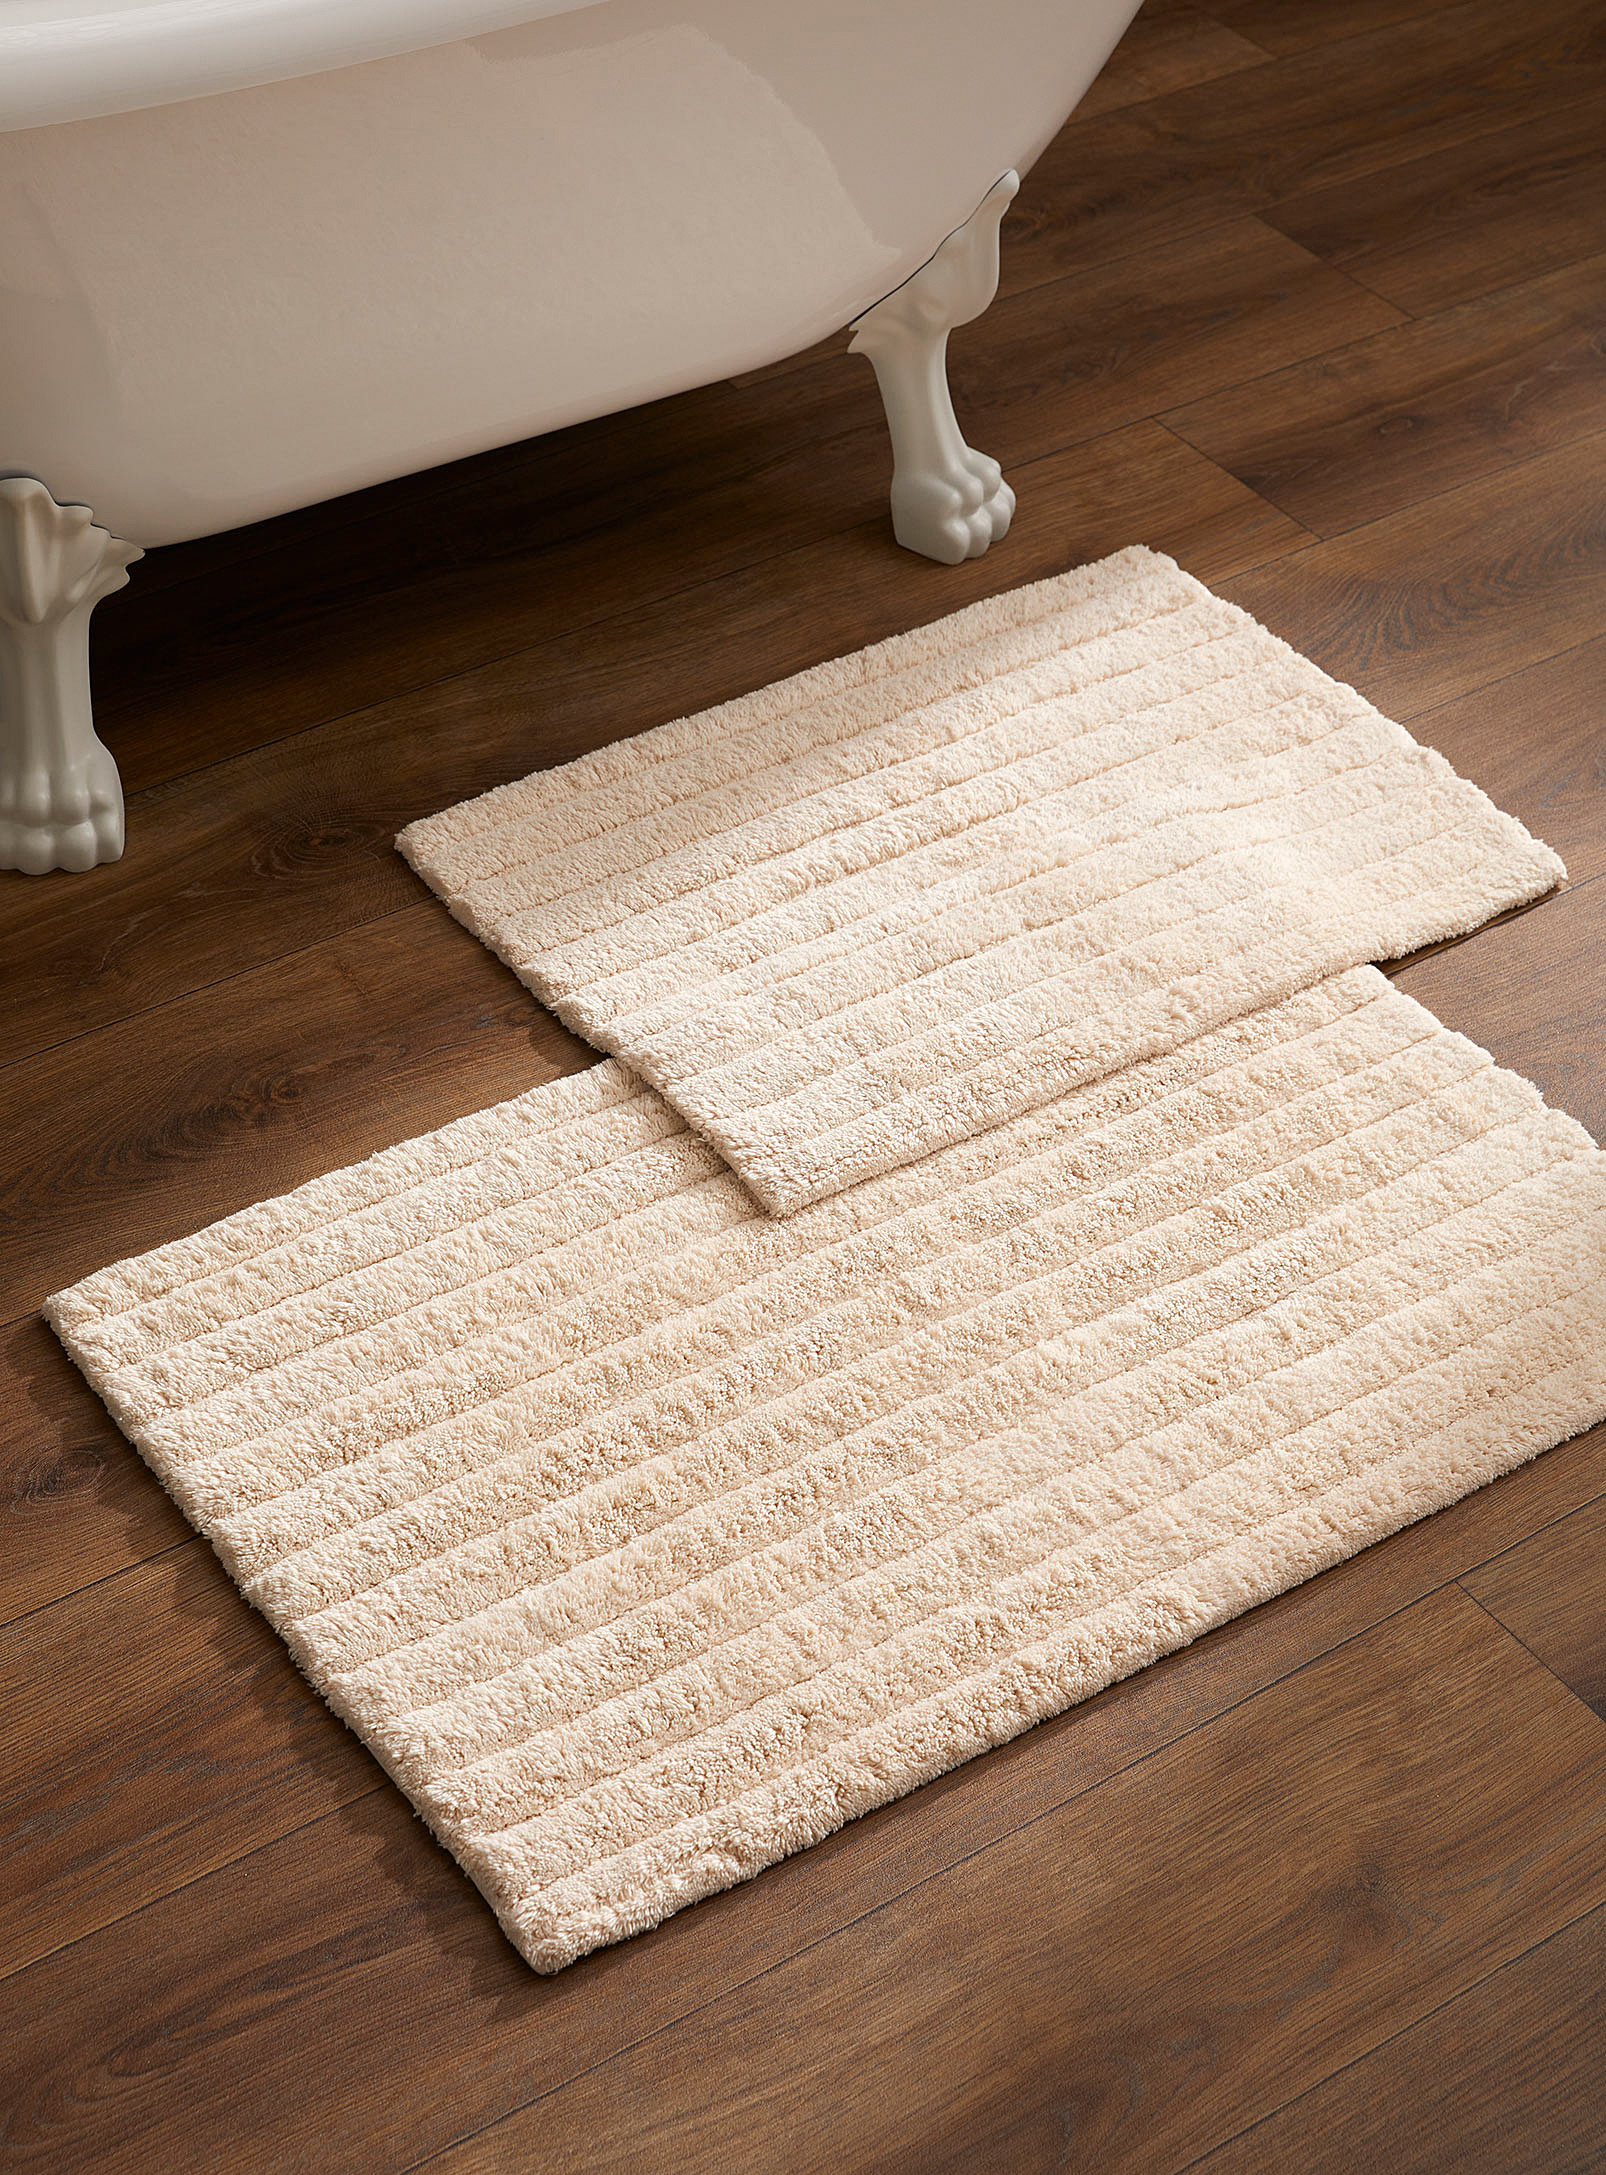 Simons Maison Horizontal Strips Bath Mat See Available Sizes In Neutral